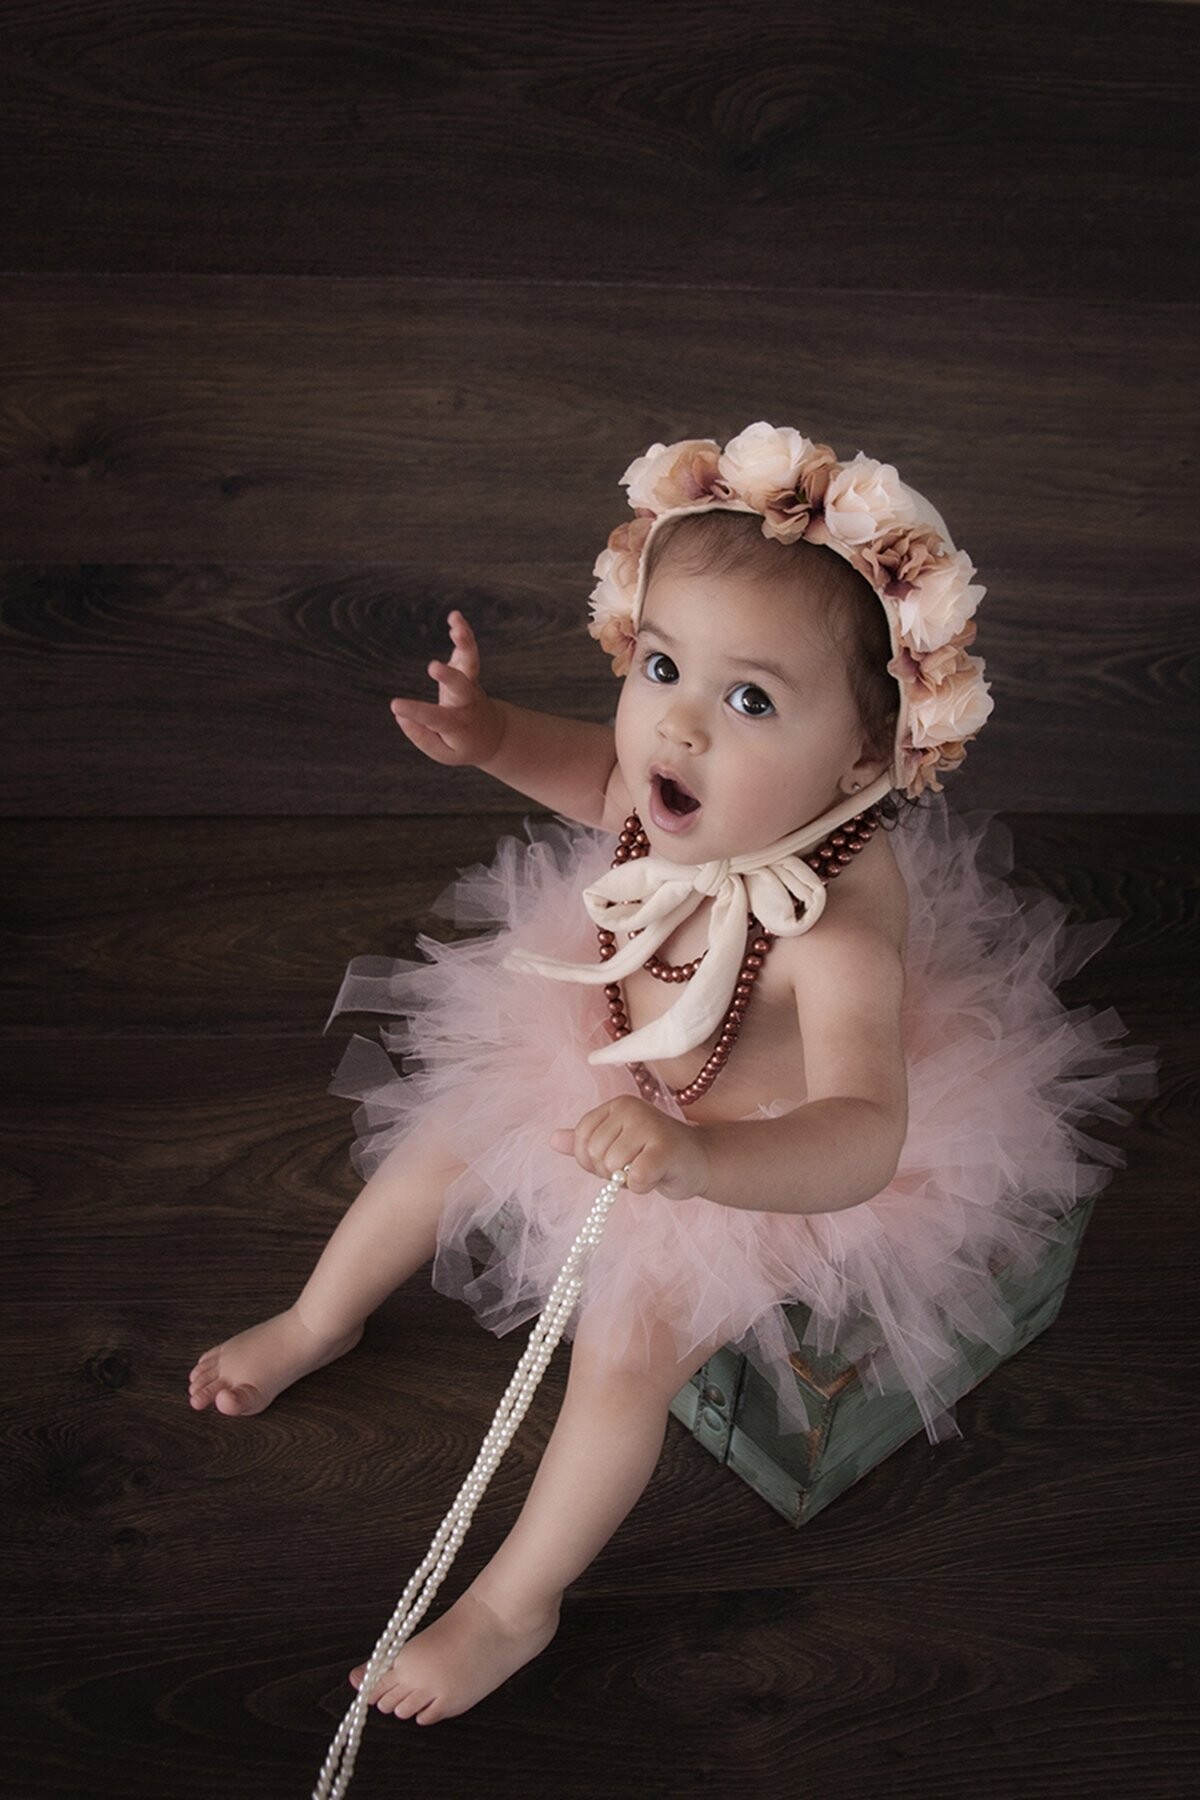 Baby Olivia came to my studio for her Cake Smash photoshoot. Charming little girl, she smiled at my camera all the time. Her parents are two of the finest jewelry artists of the country, and they were looking for a simple and beautiful session. We all are very happy with the results.